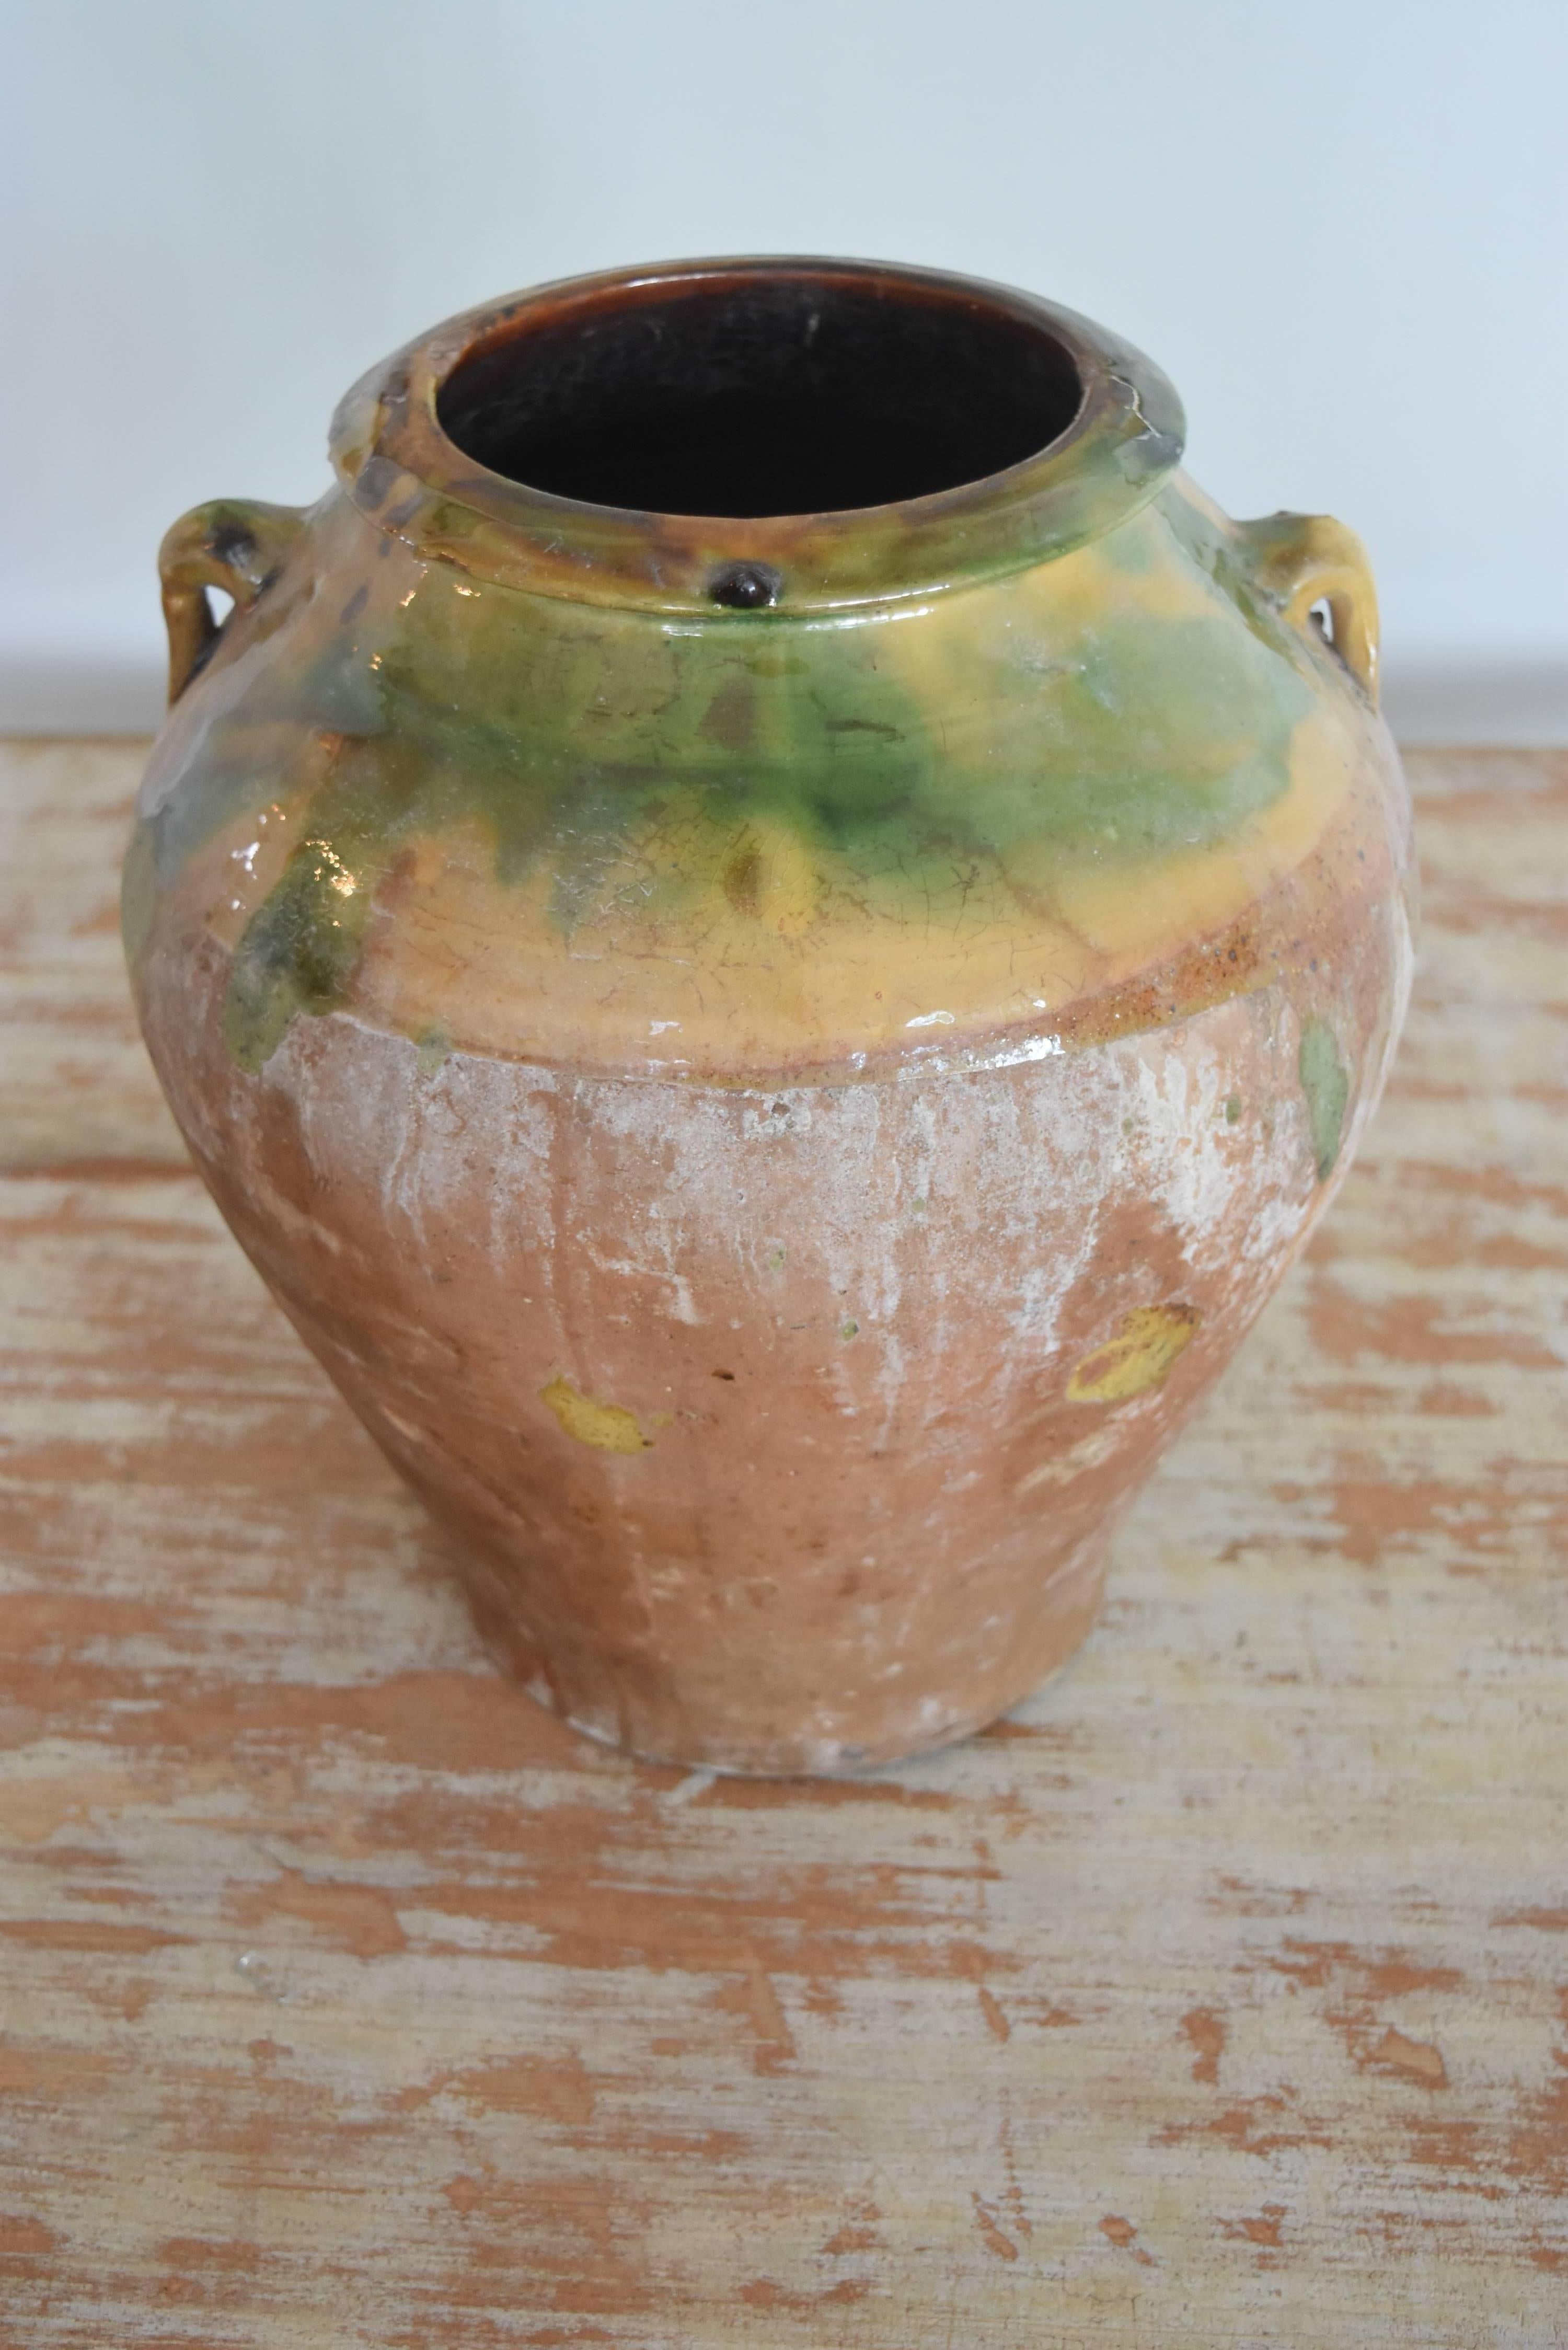 Earthenware 19th Century Spanish Glazed Pottery from Tarragona with Double Handles